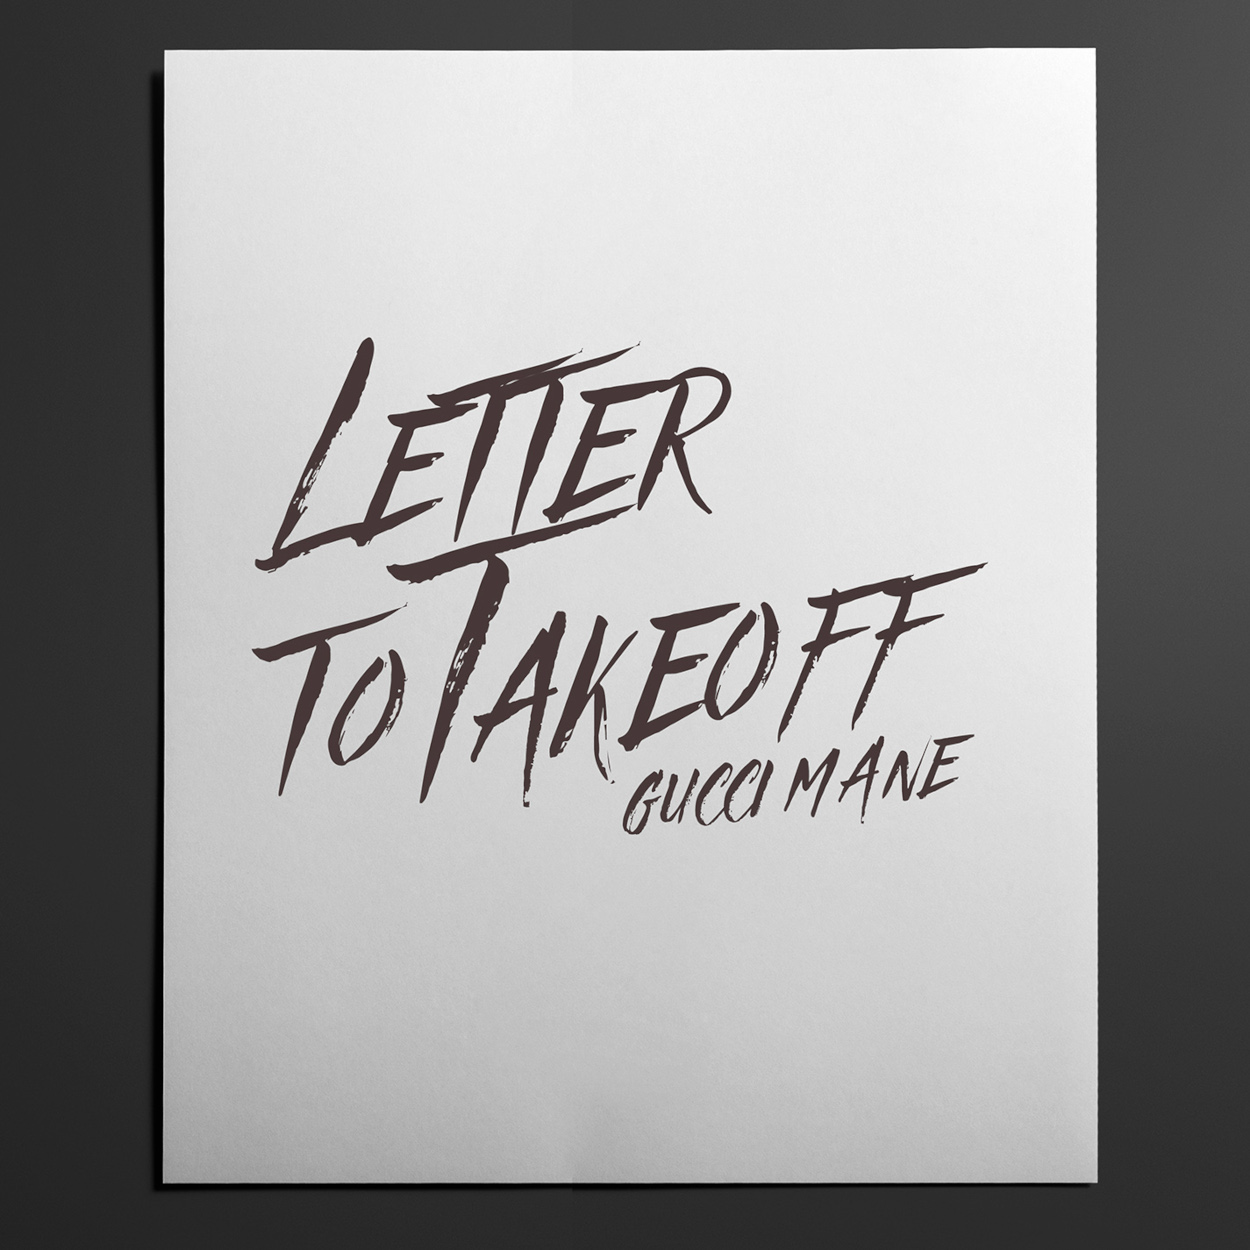 Letter To TakeOff